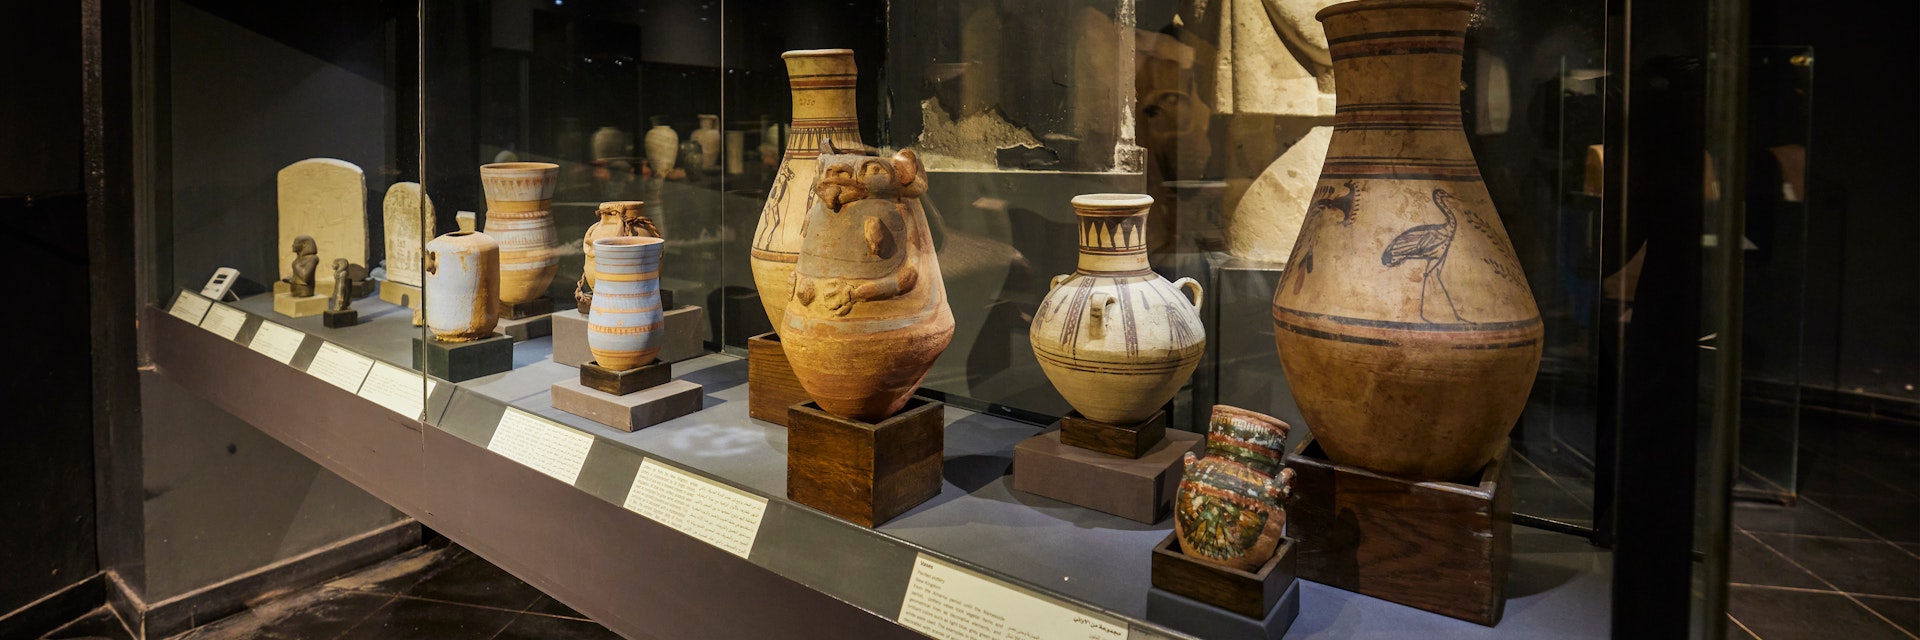 Exhibits at the Alexandria National Museum.